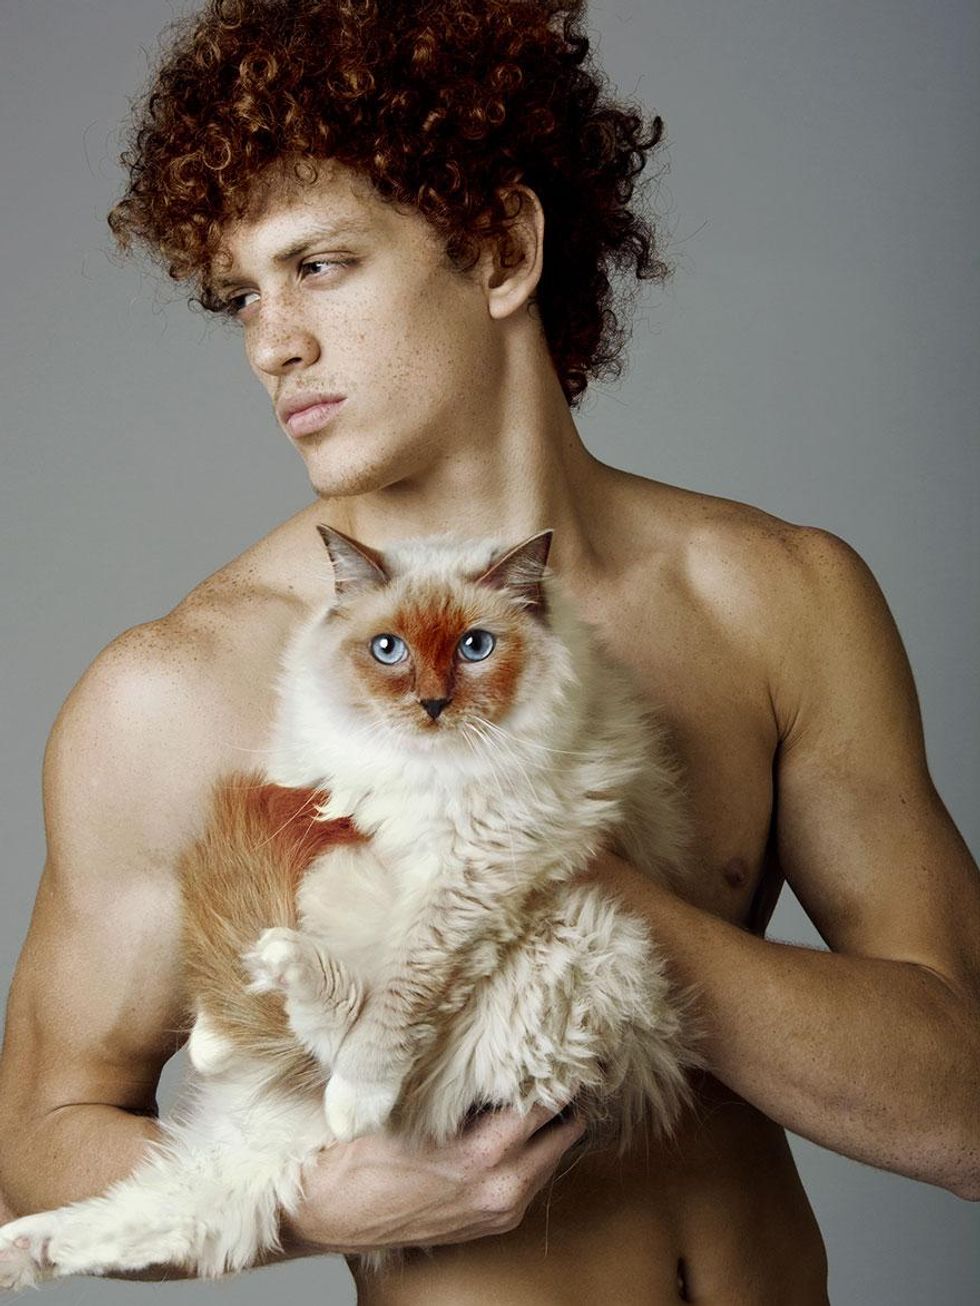 cats-male-models-photoshoot-pussy-riot-michelangelo-cecilia-4-5819daa19f194_880.jpg